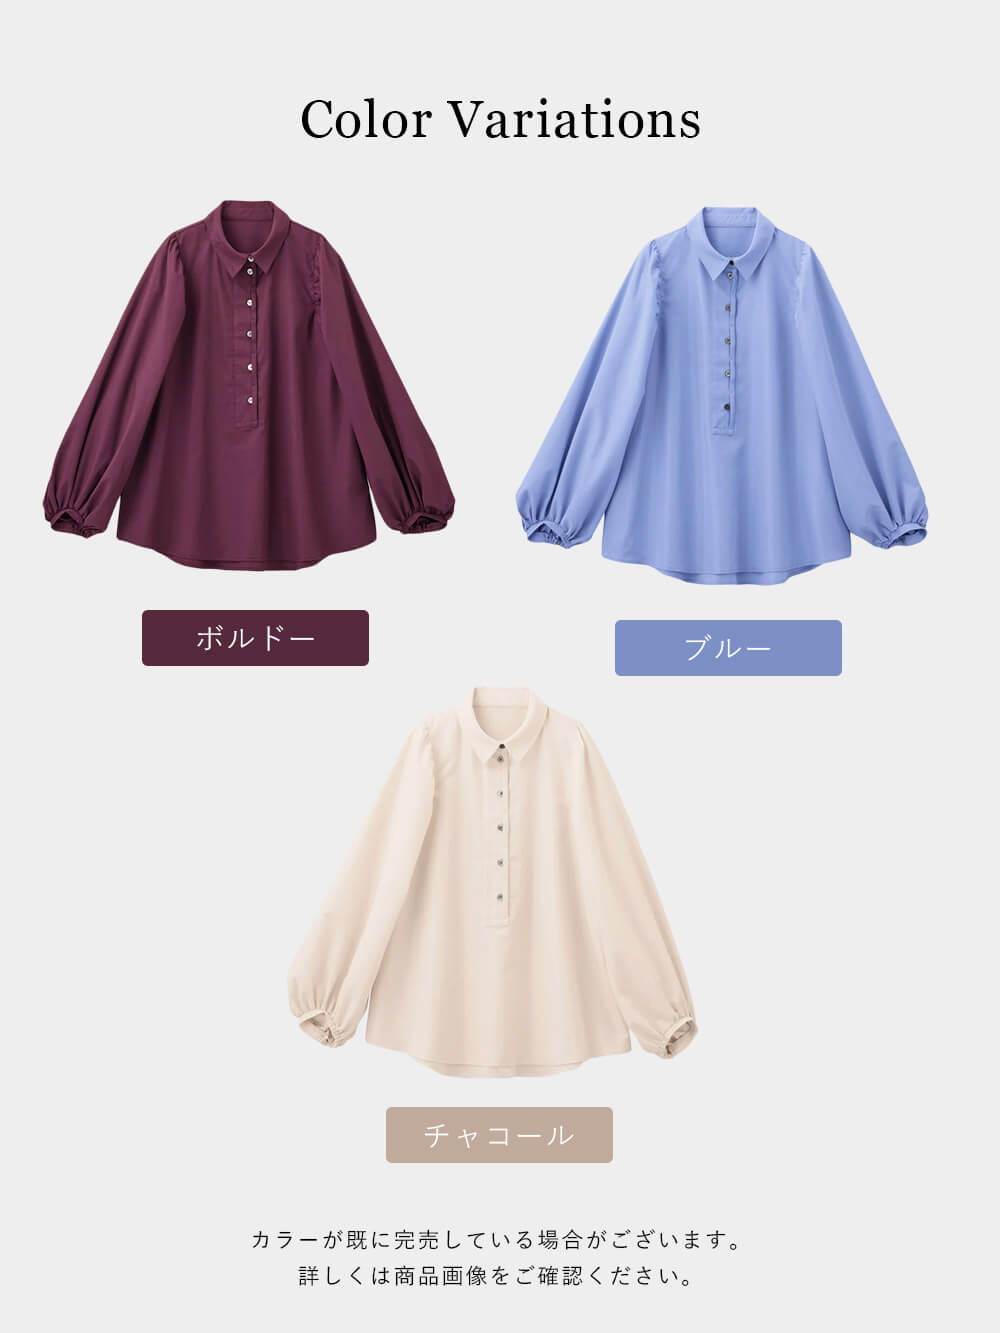  maternity tops front opening long sleeve shoulder gya The - blouse sleeve ... sleeve collar attaching shirt nursing clothes work clothes office work clothes commuting office plain 